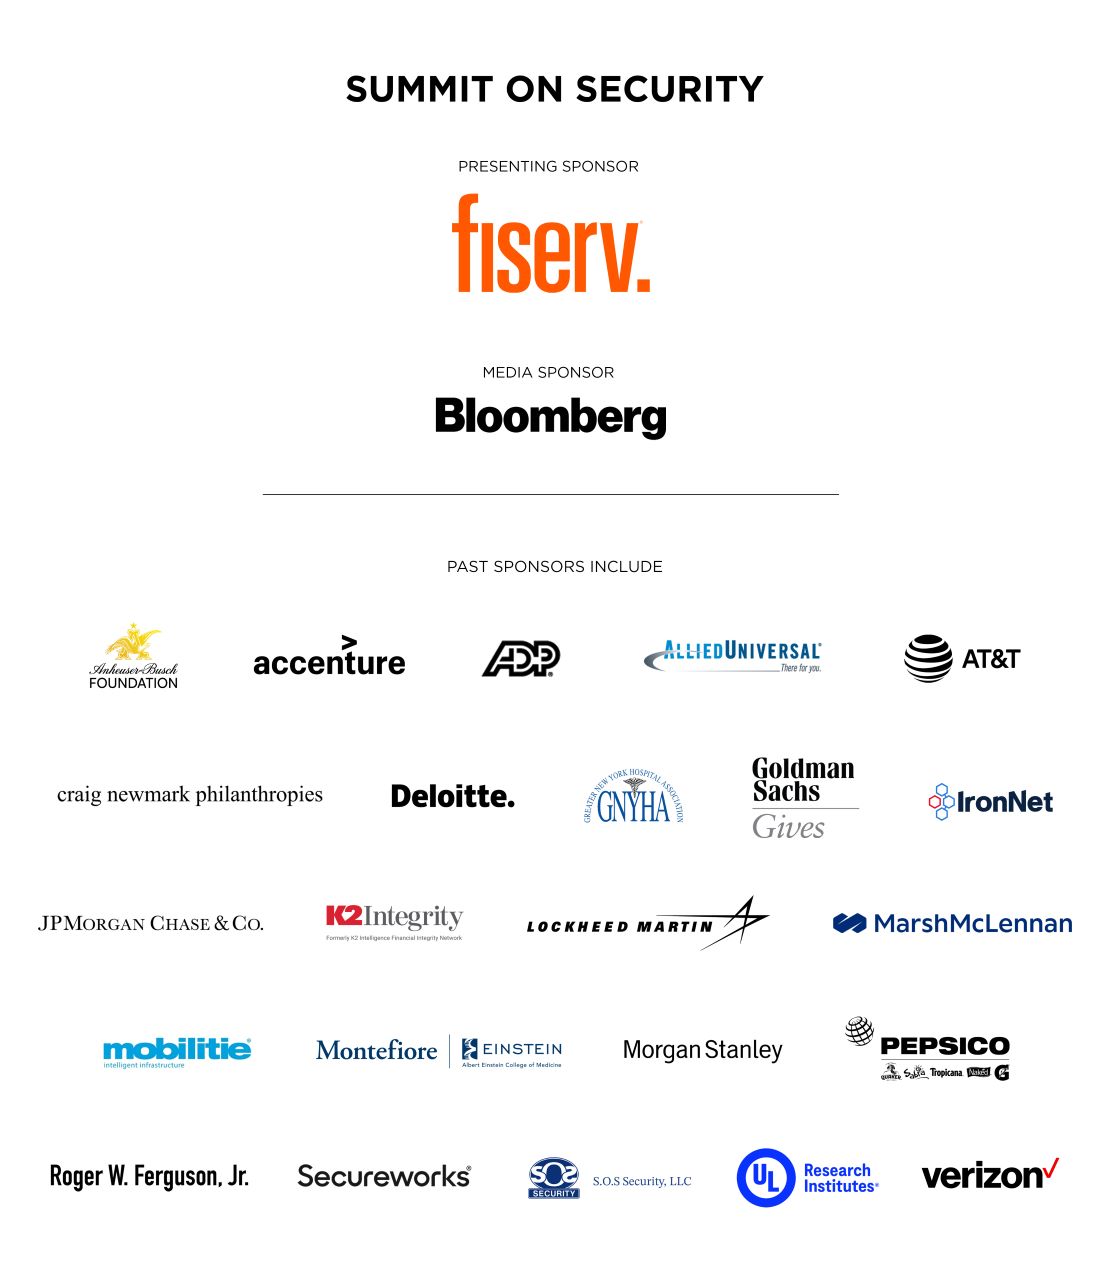 Assortment of multi-colored logos stacked on each other. The represented companies are Fiserv, Bloomberg, the Anheuser-Busch Foundation, Accenture, ADP, Allied Universal, AT&T, Craig Newmark Philanthropies, Deloitte, GNYHA, Goldman Sachs Gives, IronNet, JPMorgan Chase & Co.m K2Integrity, Lockheed Martin, MarshMcLennan, Mobilitie, Montefiore Einstein College of Medicine, Morgan Stanley, Pepsico, Roger W. Ferguson, Jr., Secureworks, S.O.S. Security, Research Institutes, and Verizon. 